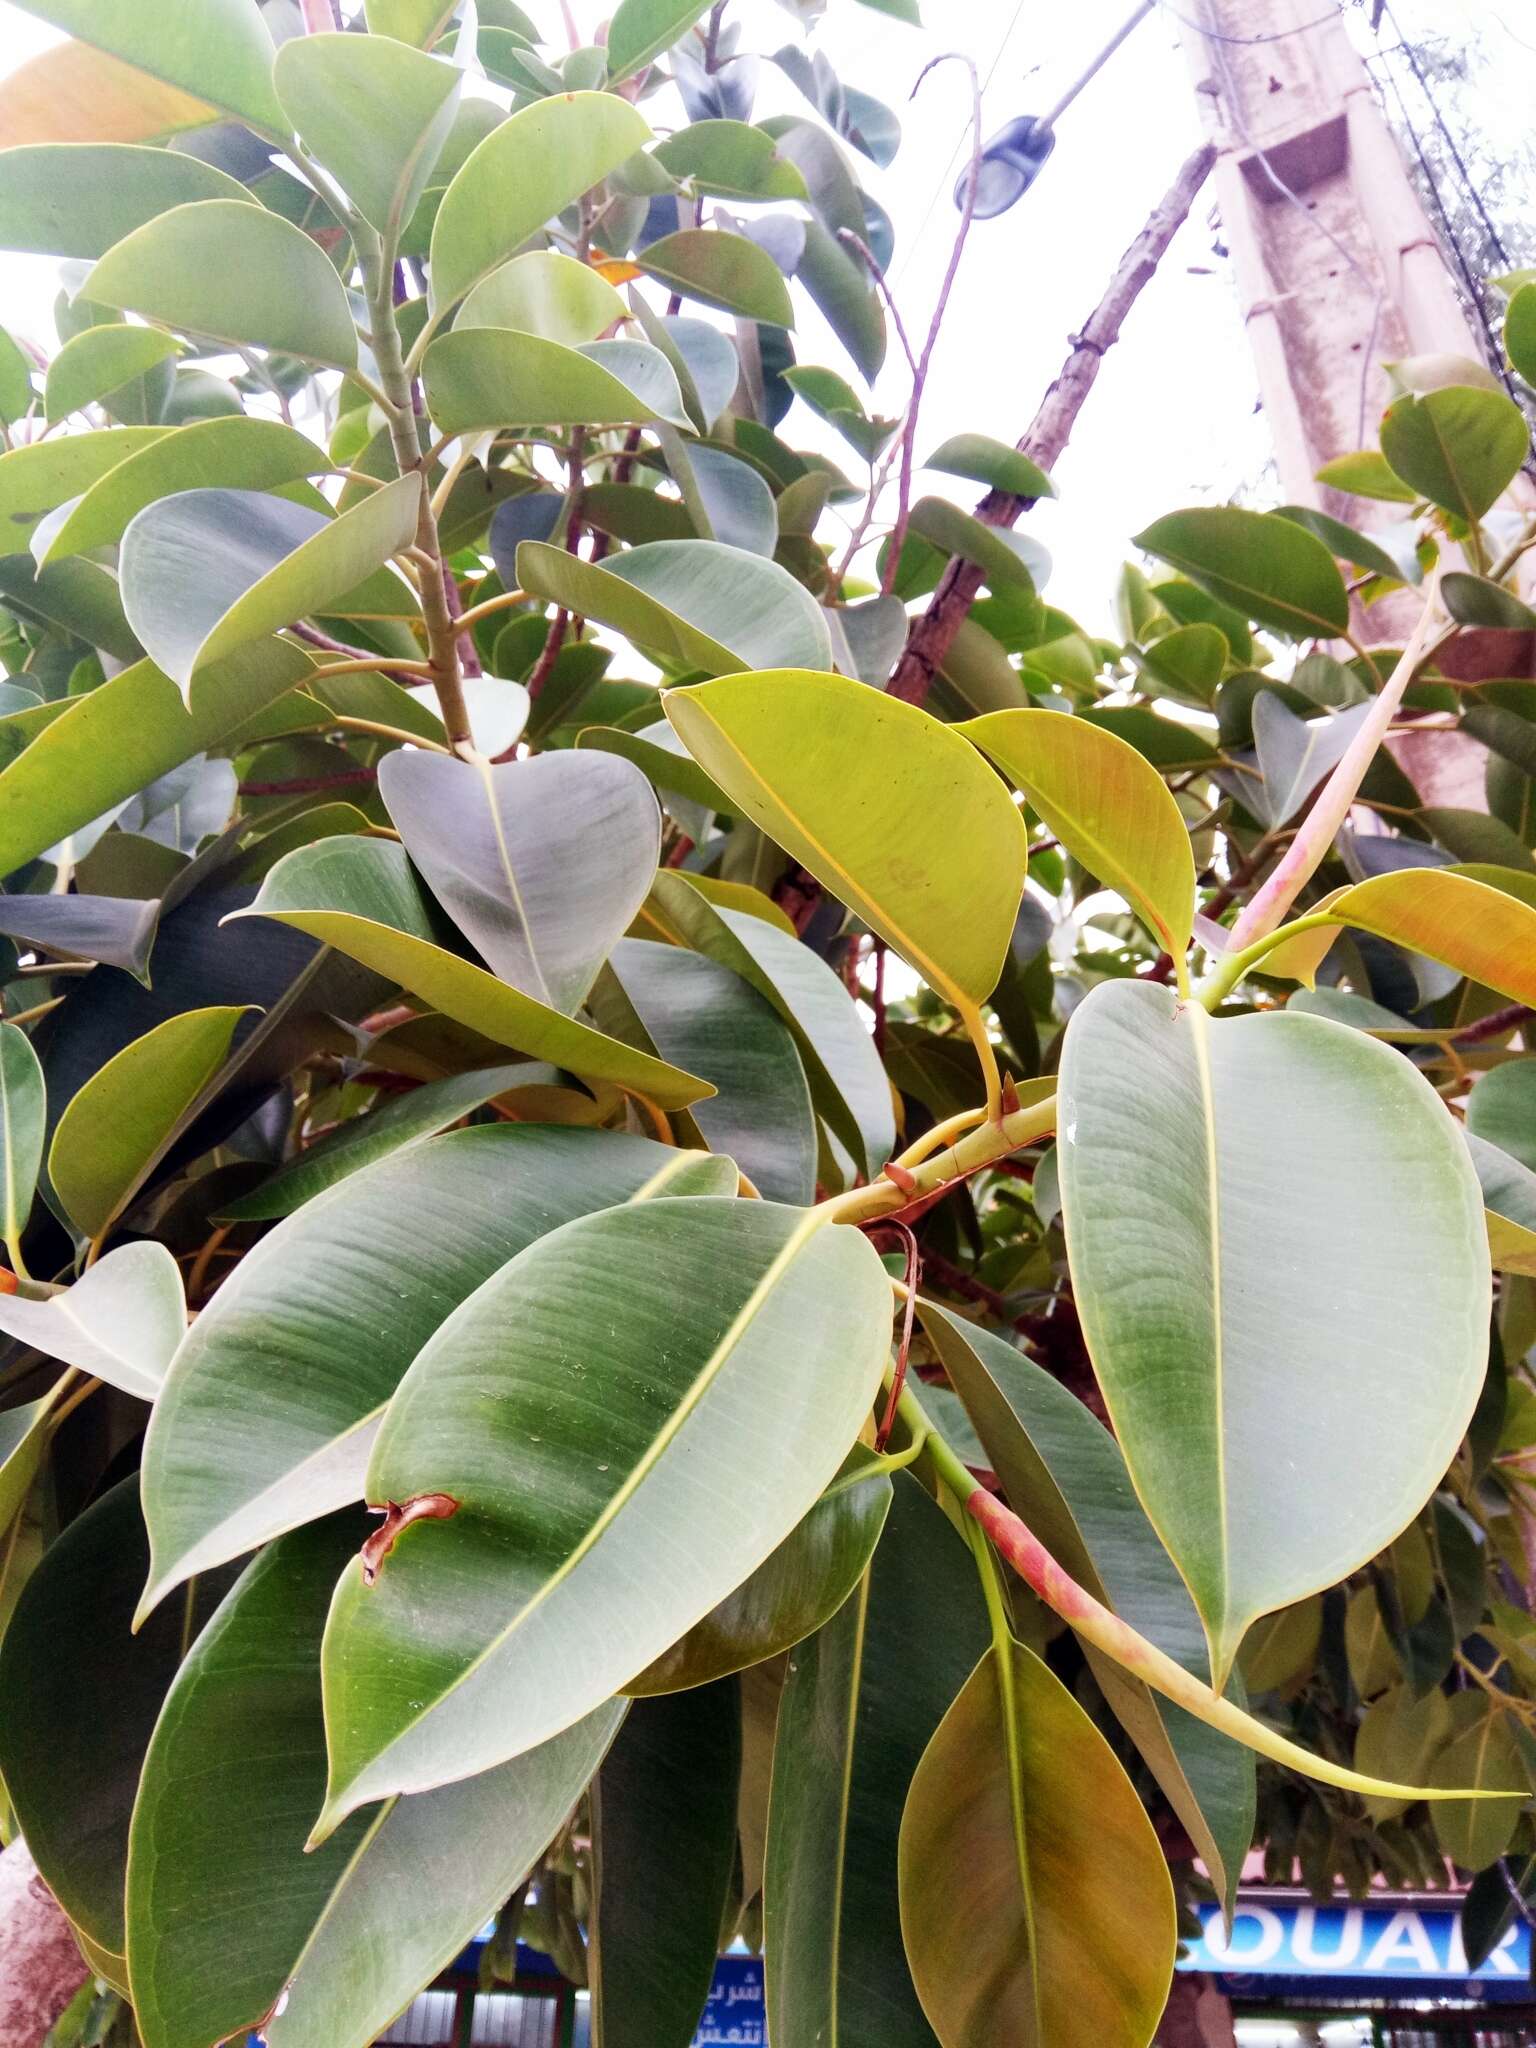 Image of Indian rubberplant